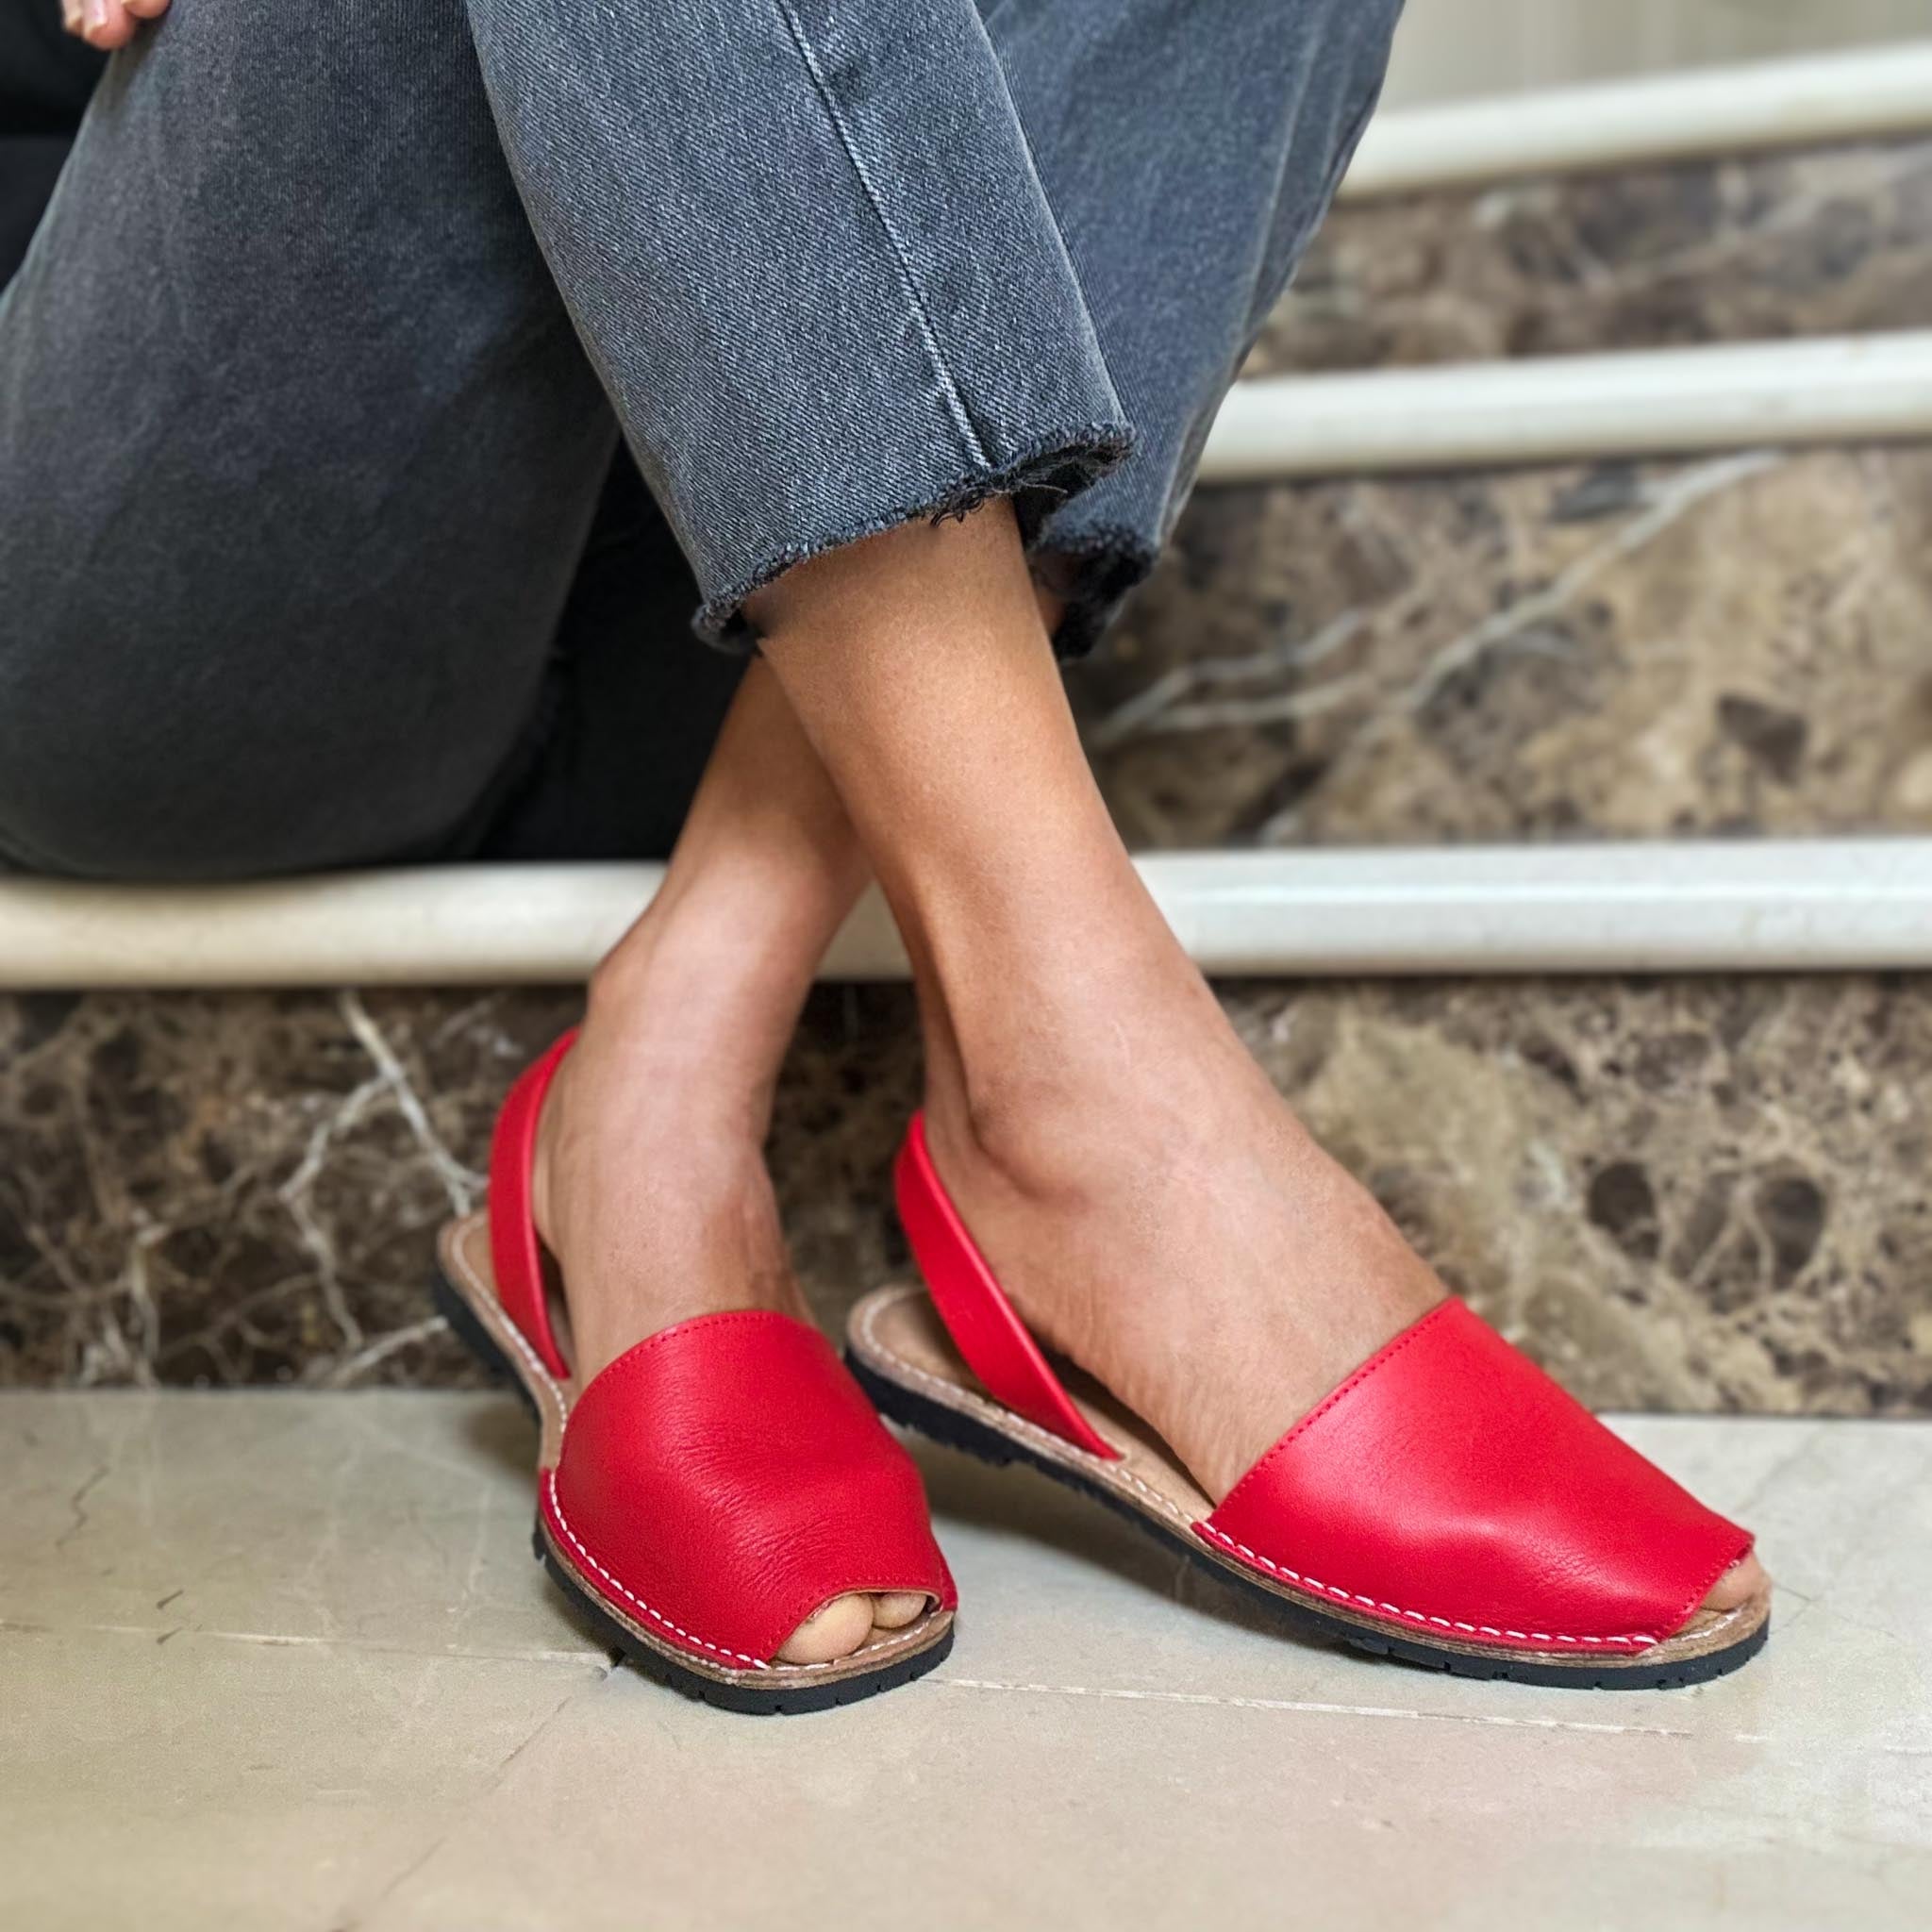 Classic Candy Red classic flats